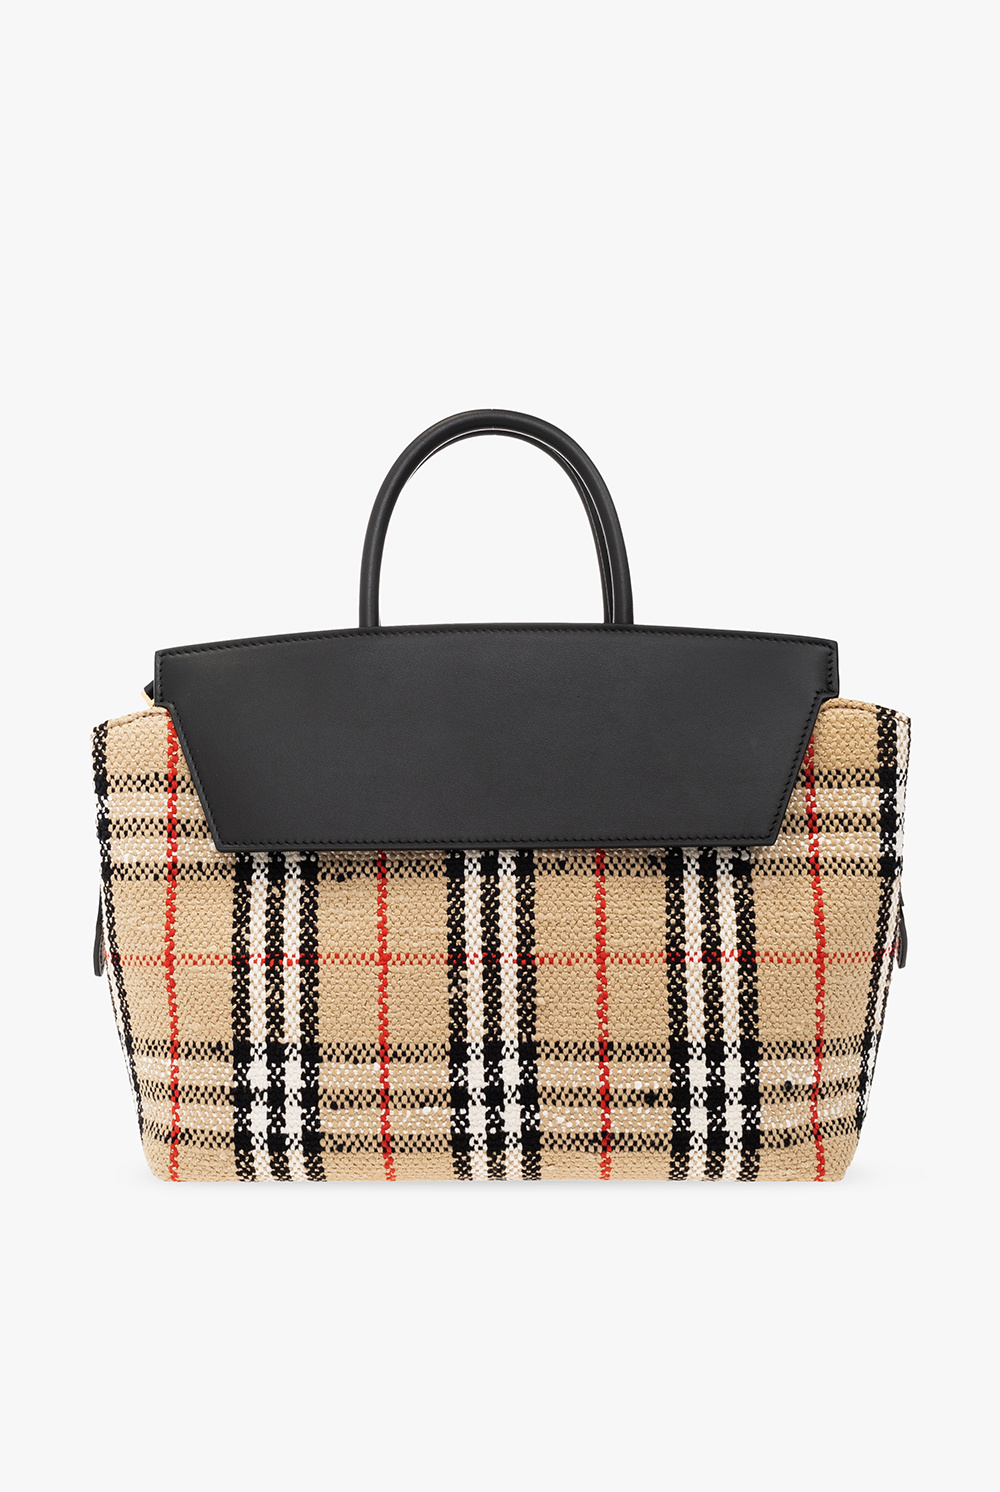 Burberry Vintage Check Two-handle Title Bag Mini Archive Beige in Cotton  Canvas/Polyester with Gold-tone - US